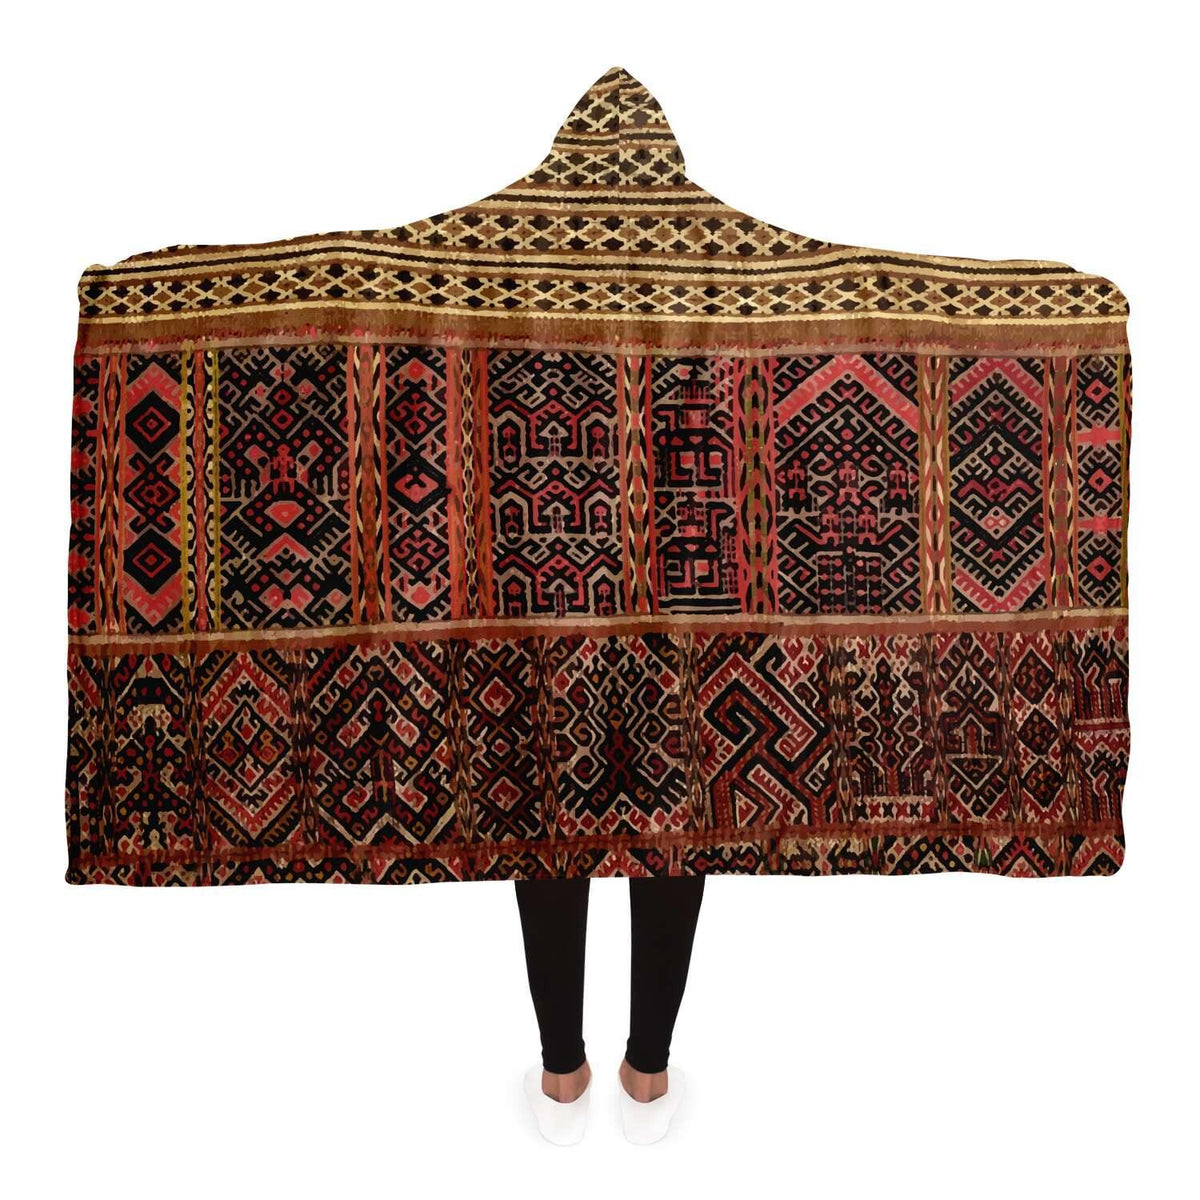 Hooded Blanket - AOP Adult / Premium Sherpa Hooded Blanket, Miao Culture Antique, Traditional Design | Sherpa Lined Hooded Blanket